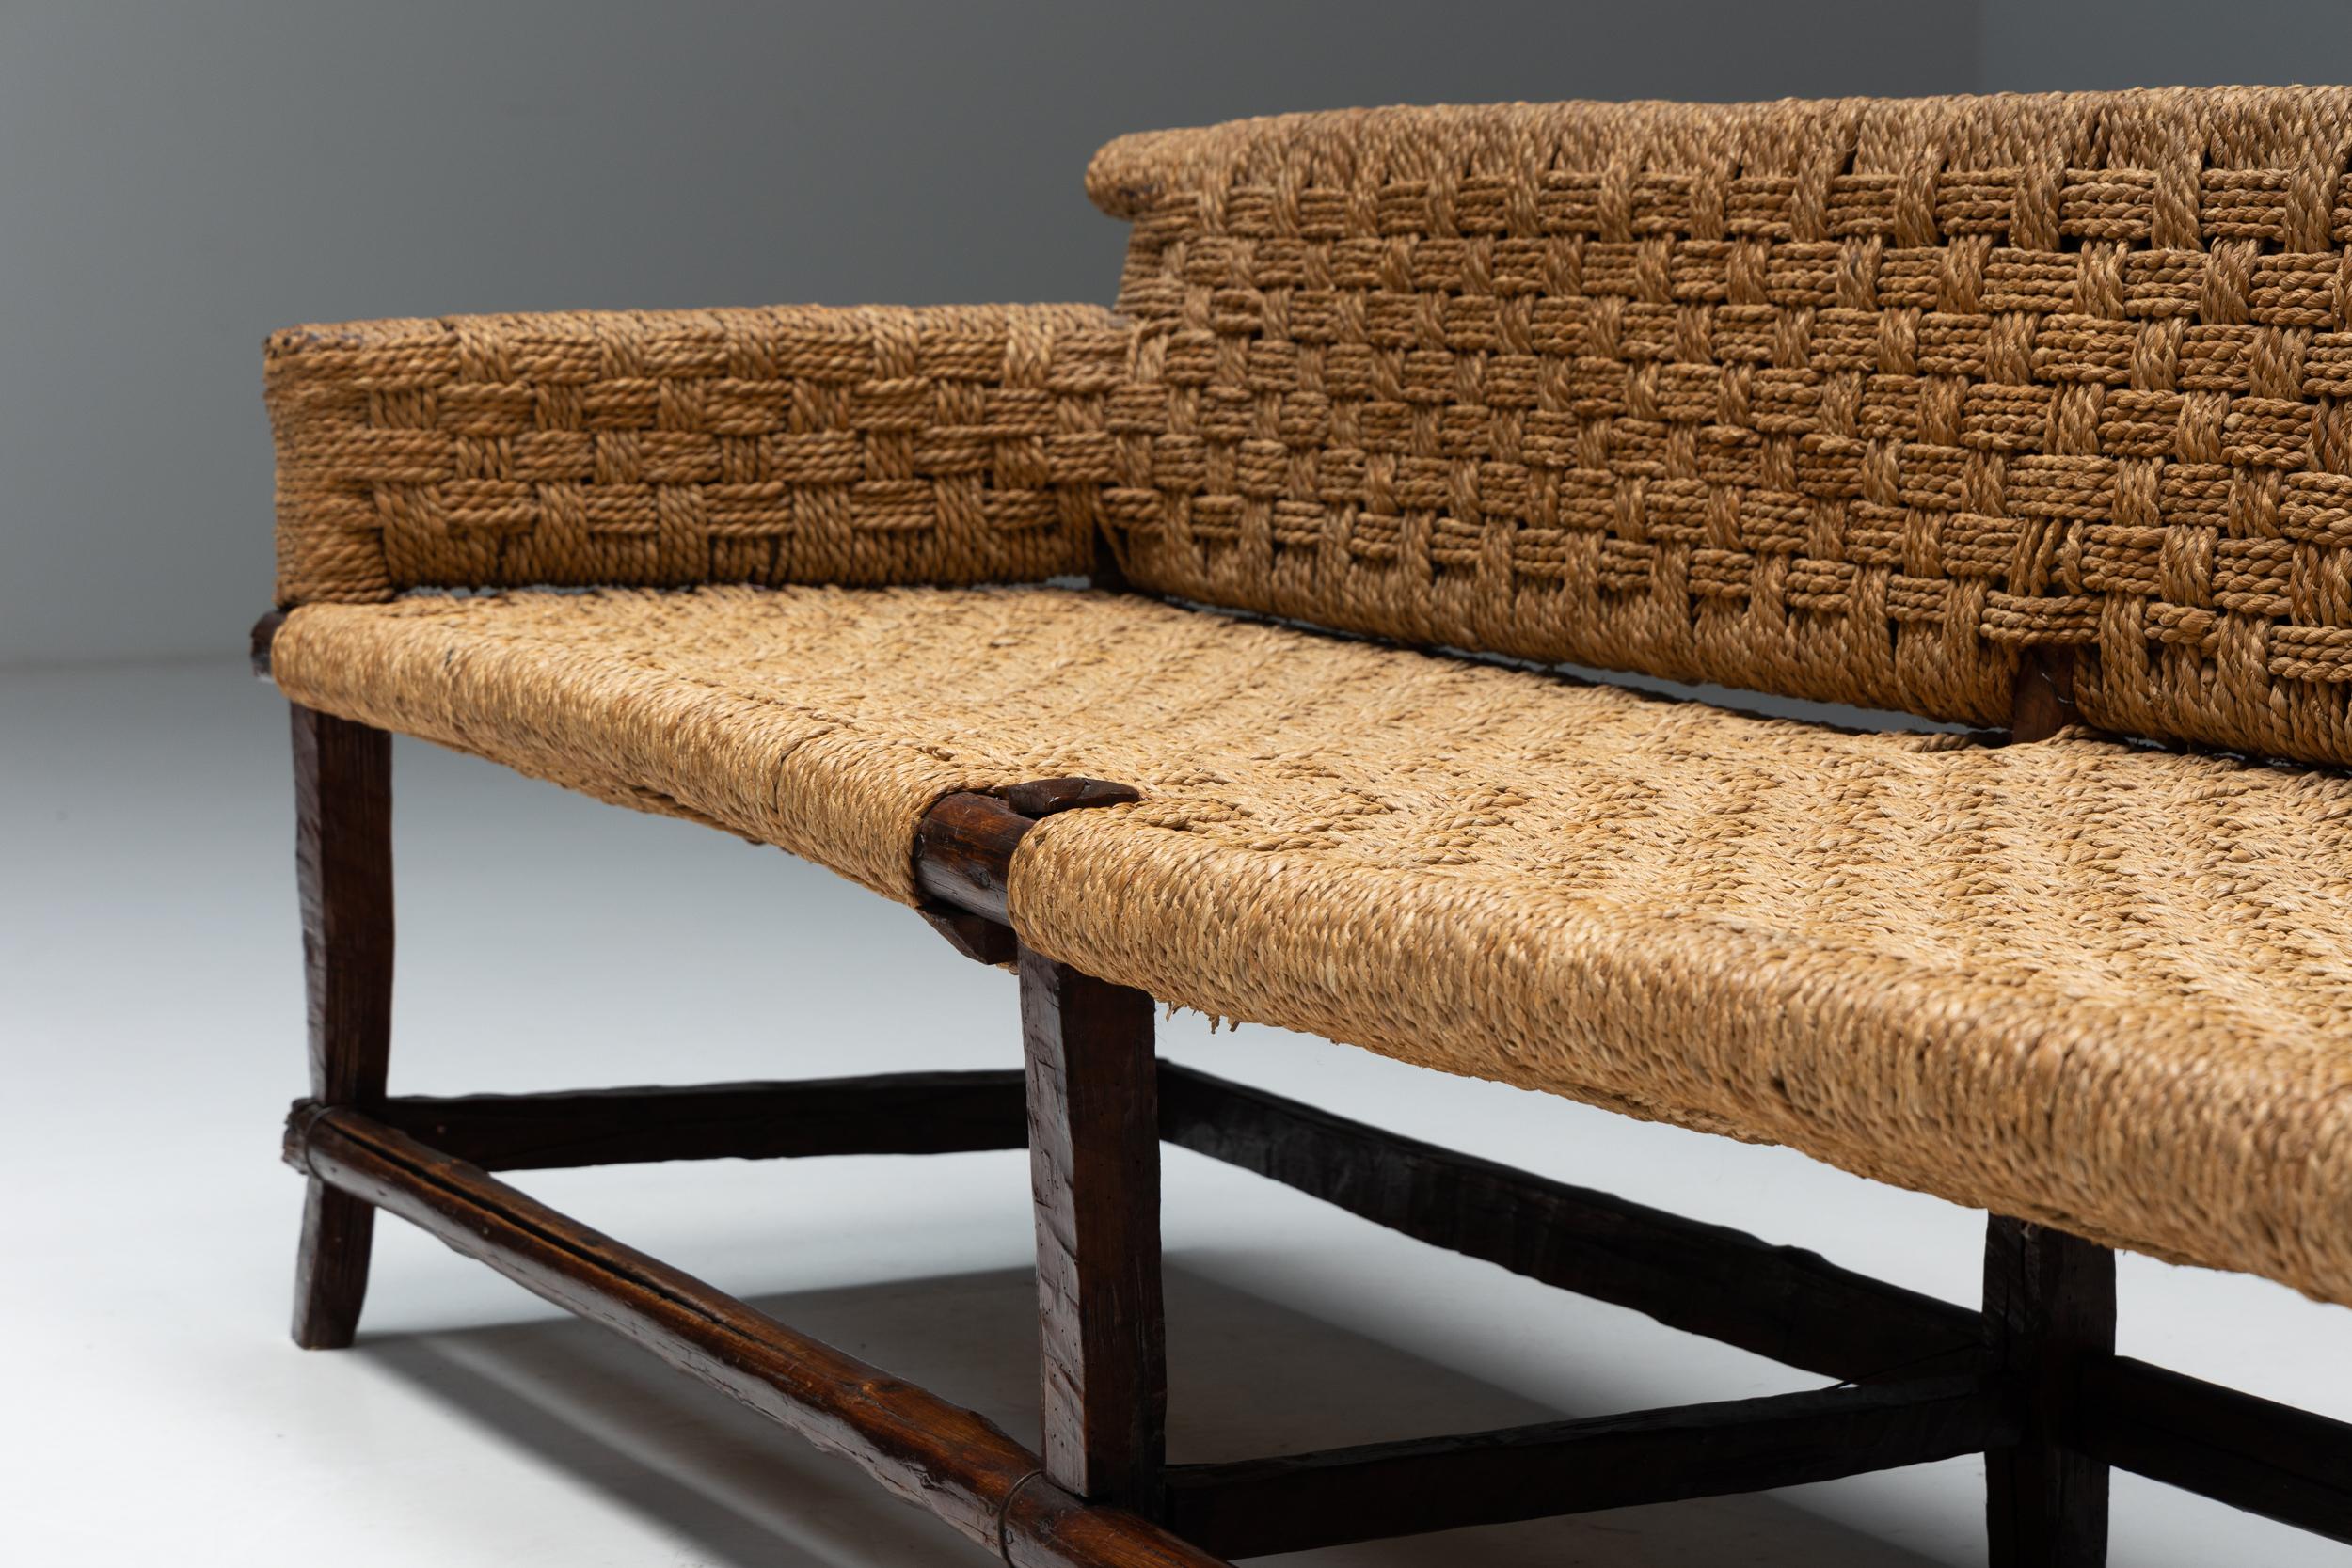 Wood Naive Folk Art Bench with Woven Seating, 1920s